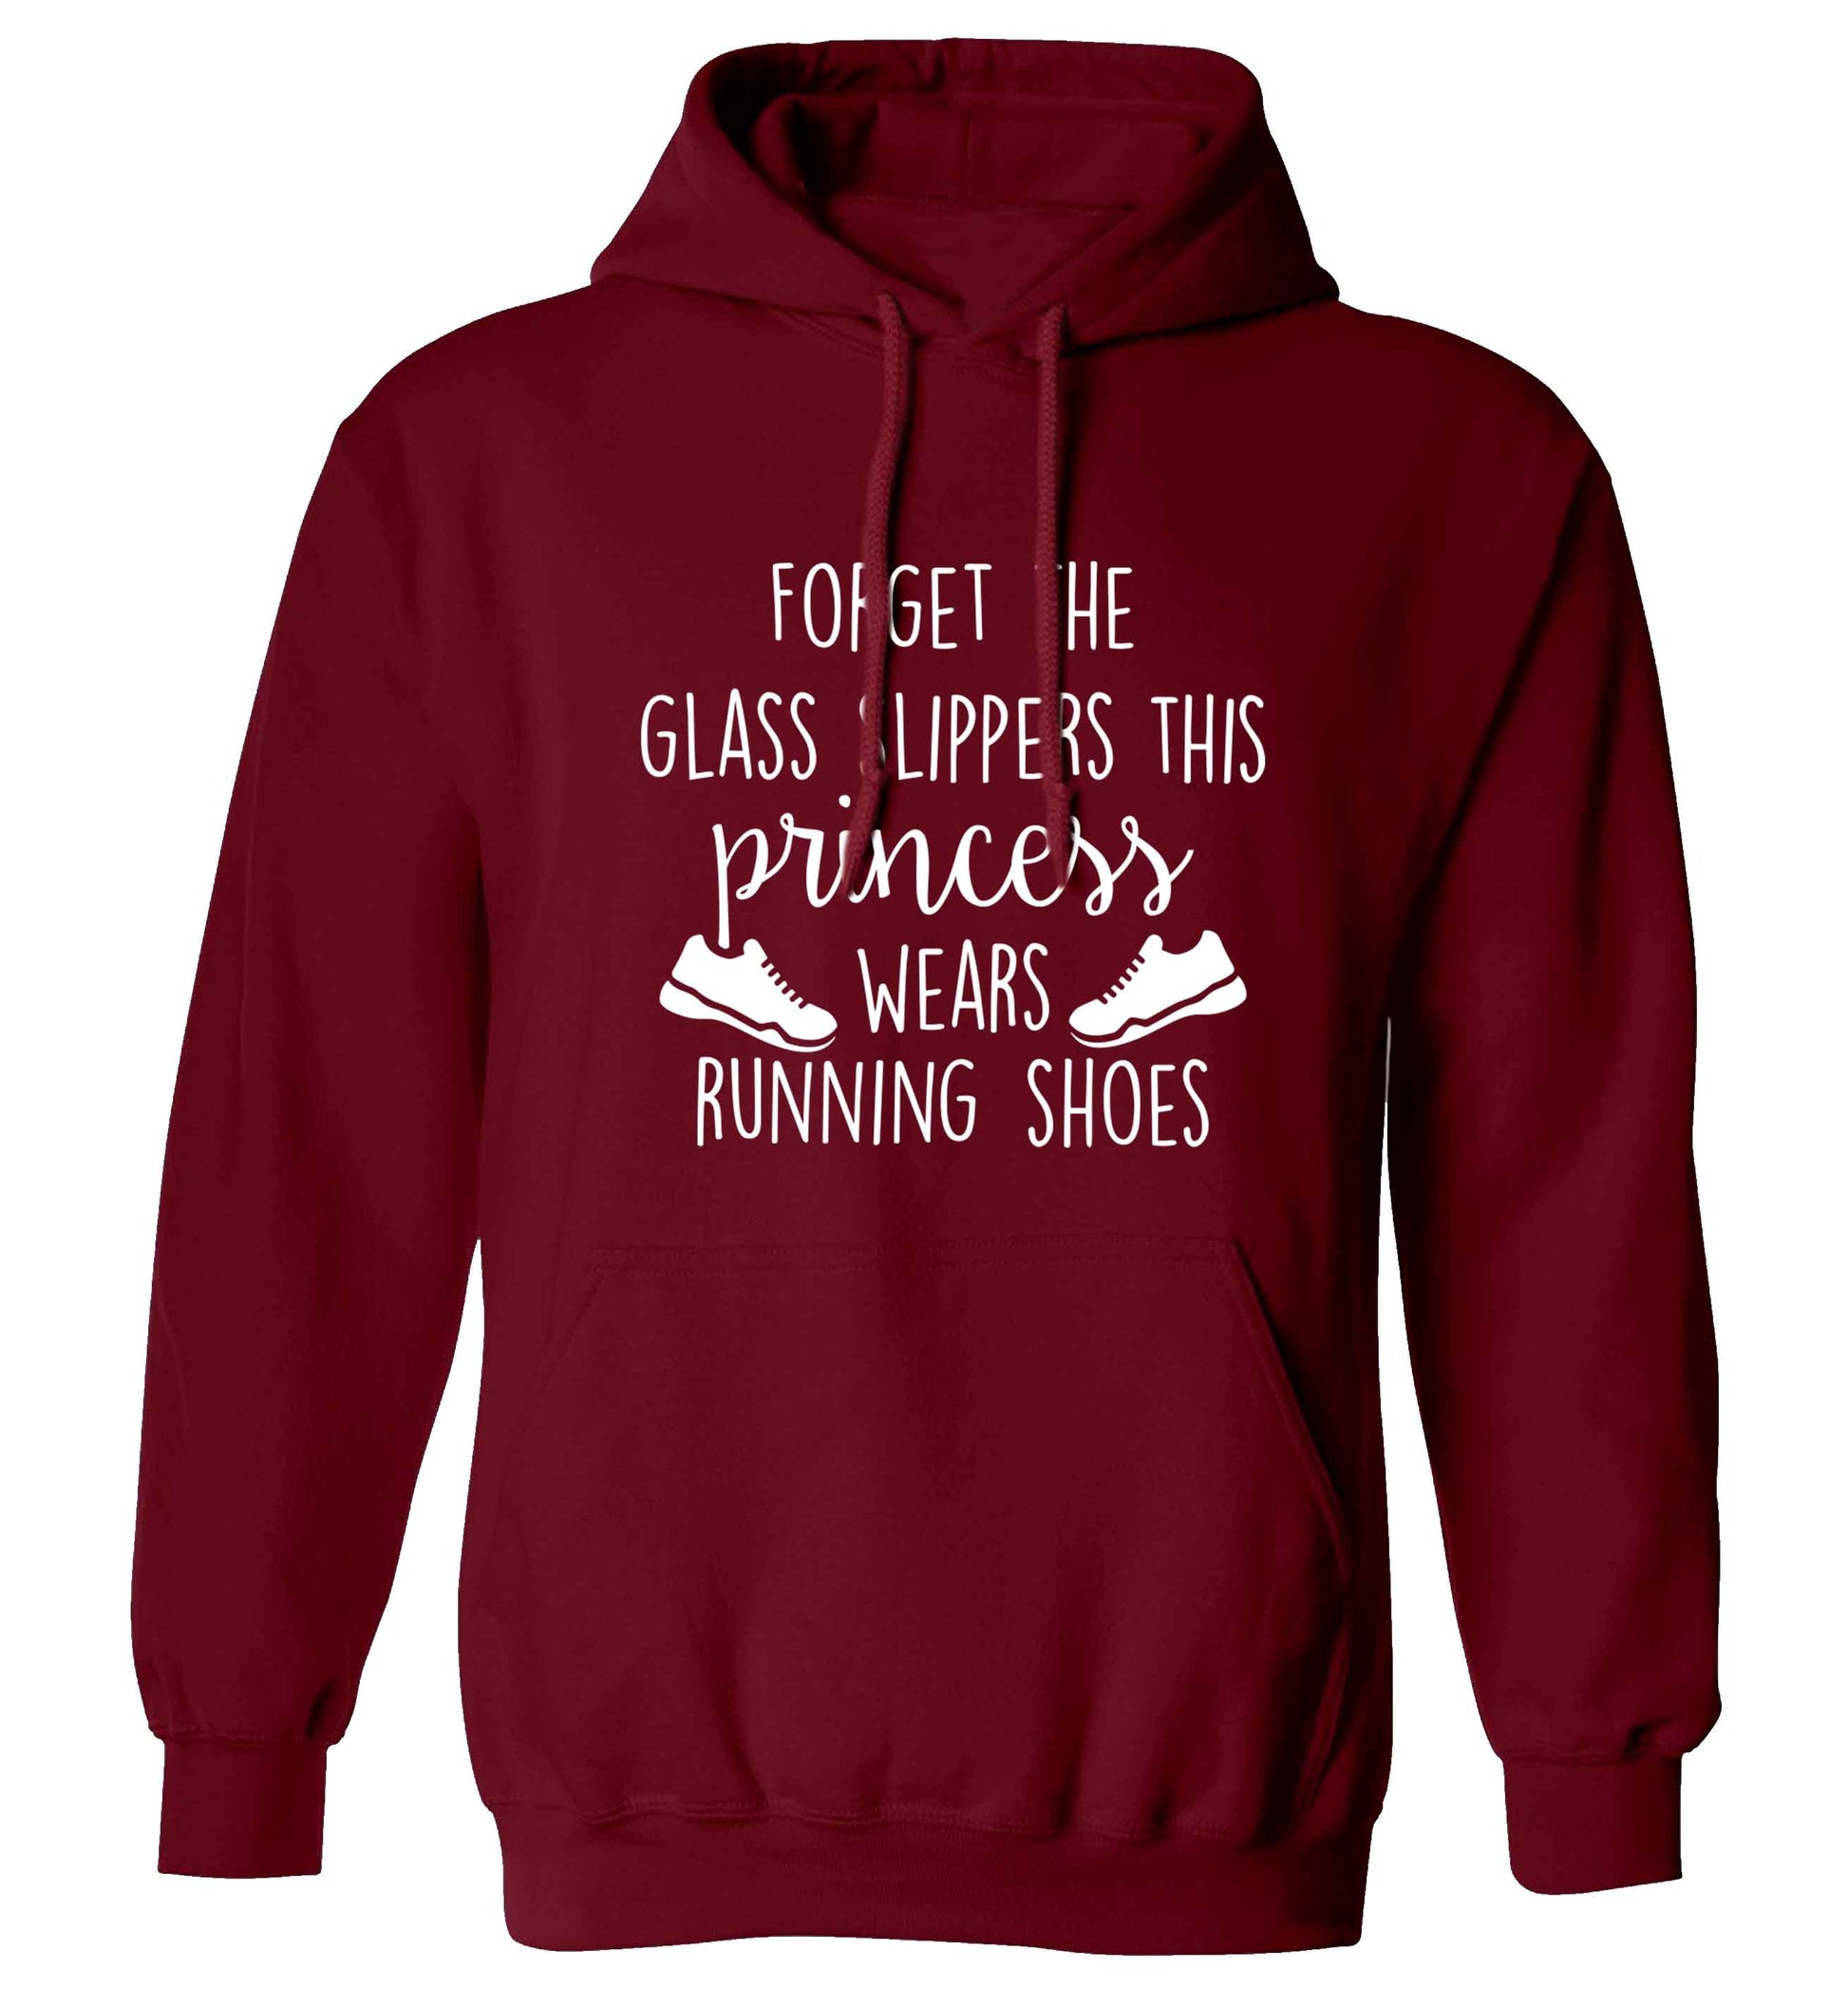 Forget the glass slippers this princess wears running shoes adults unisex maroon hoodie 2XL